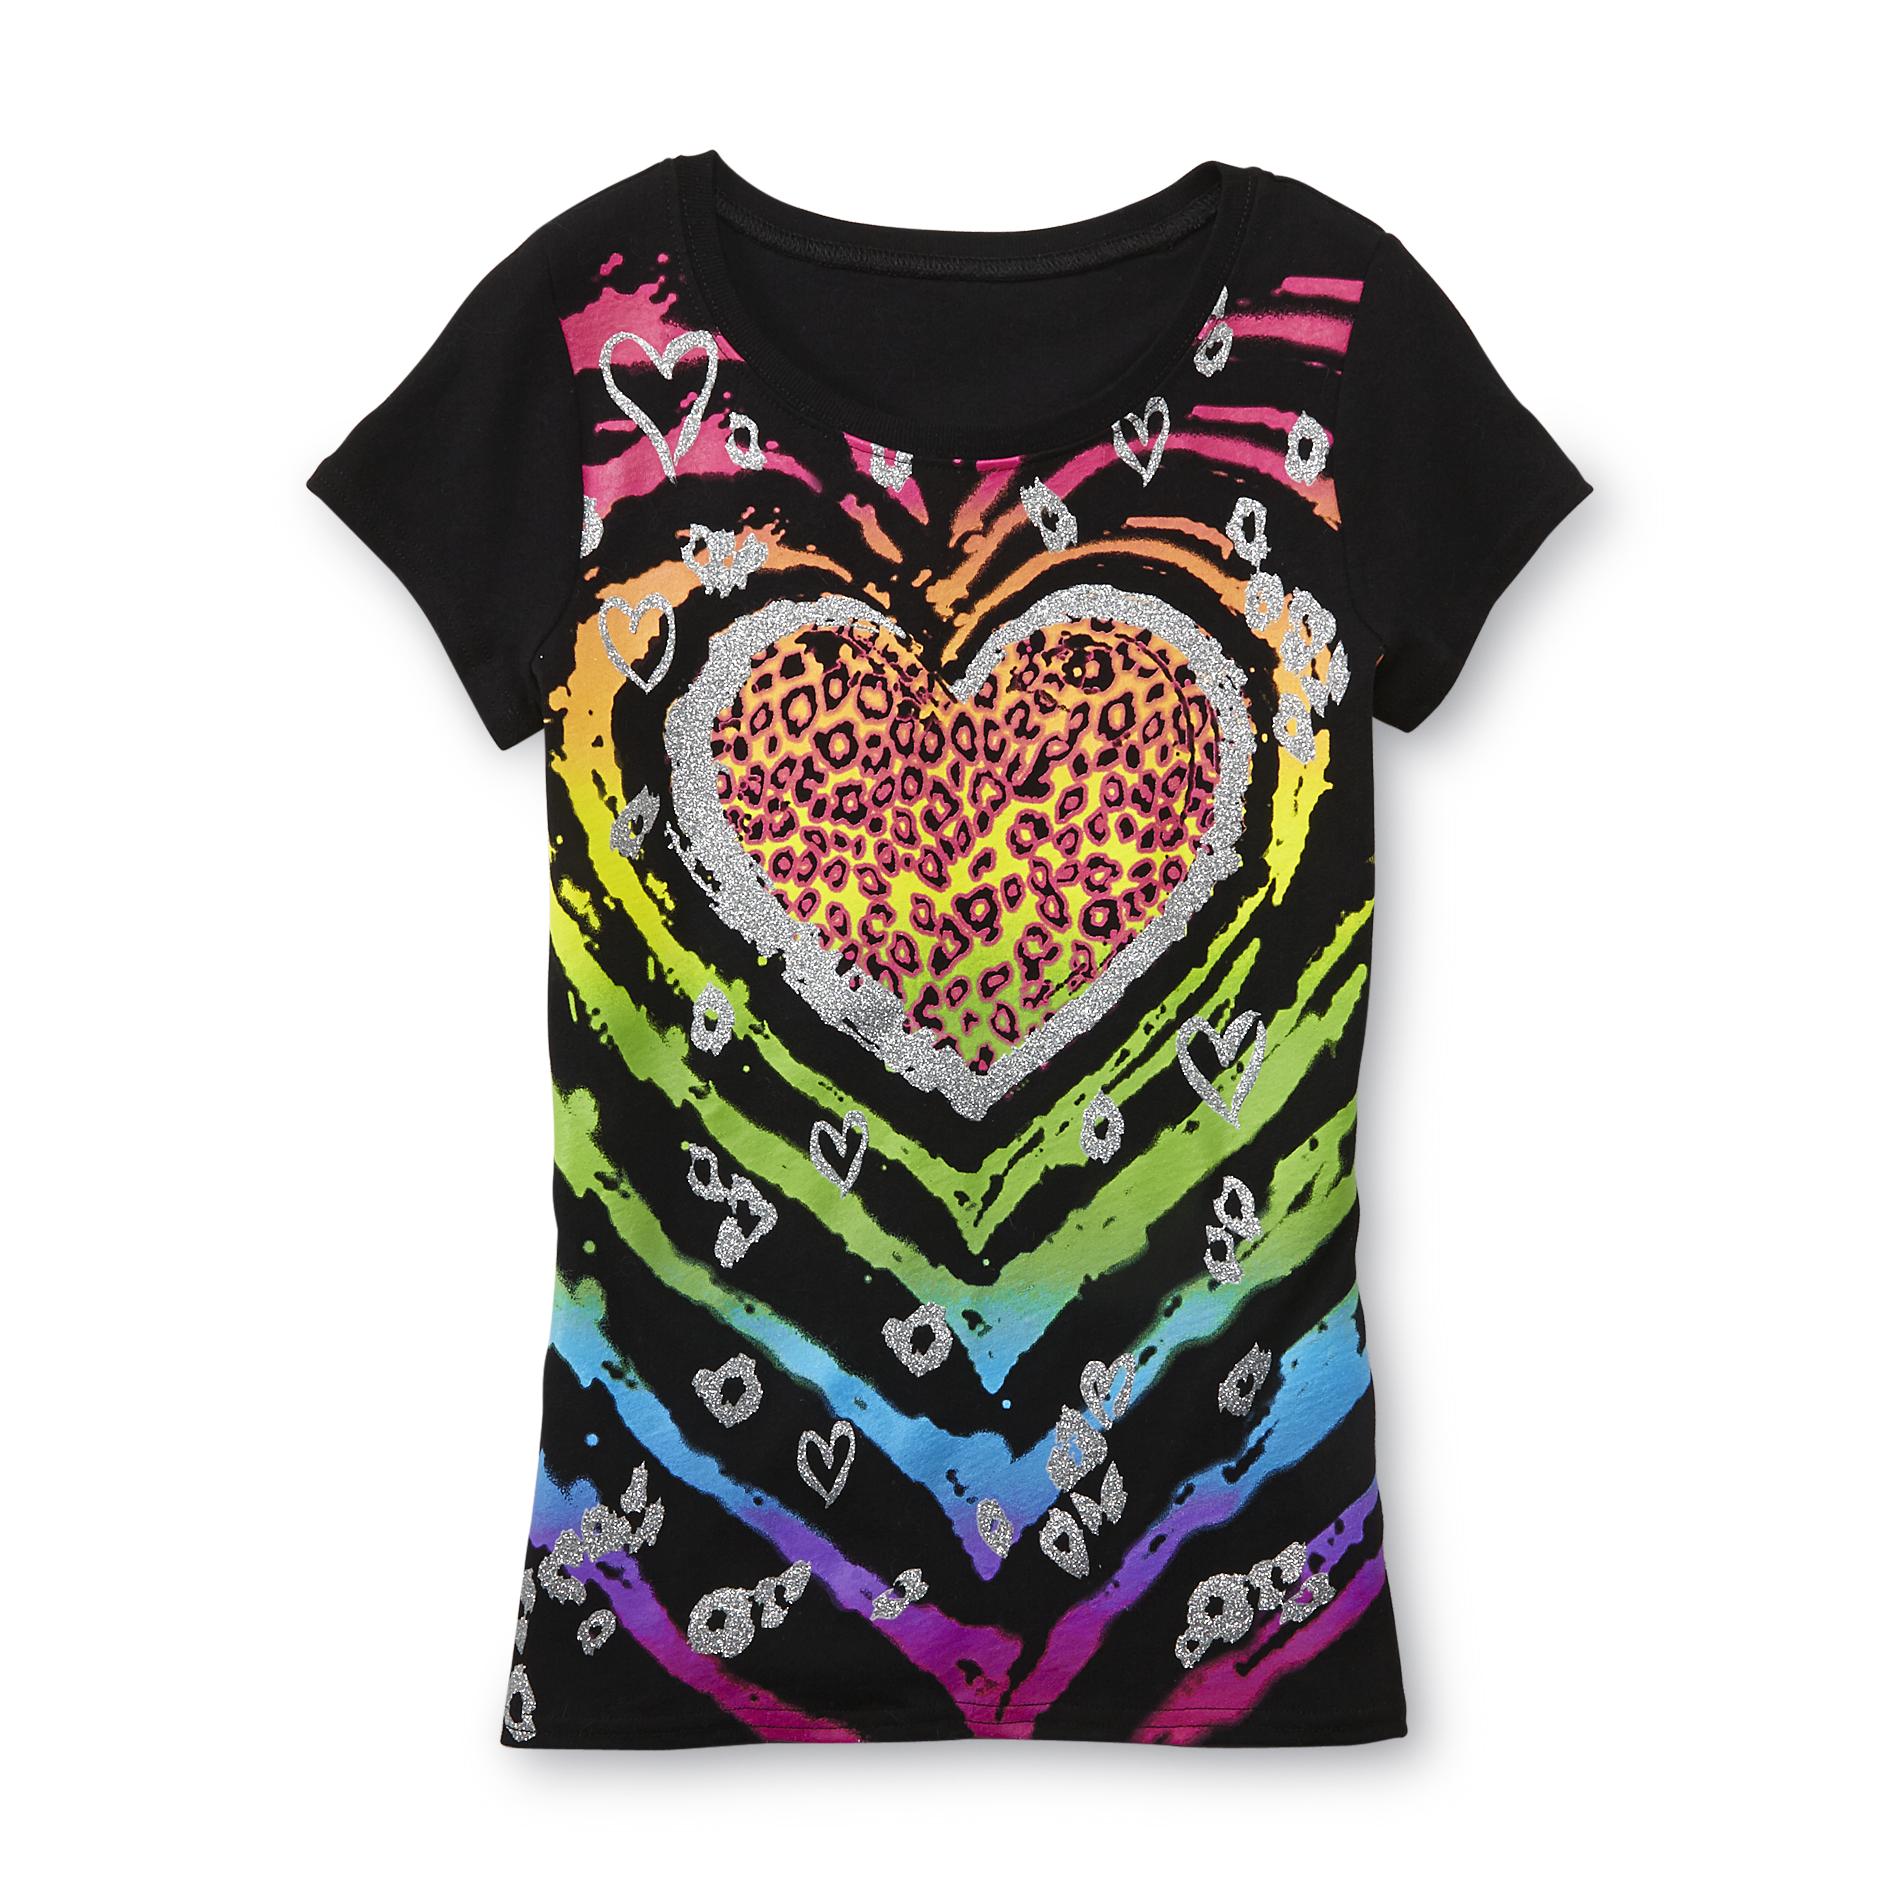 Route 66 Girl's Graphic T-Shirt - Rainbow & Leopard Hearts